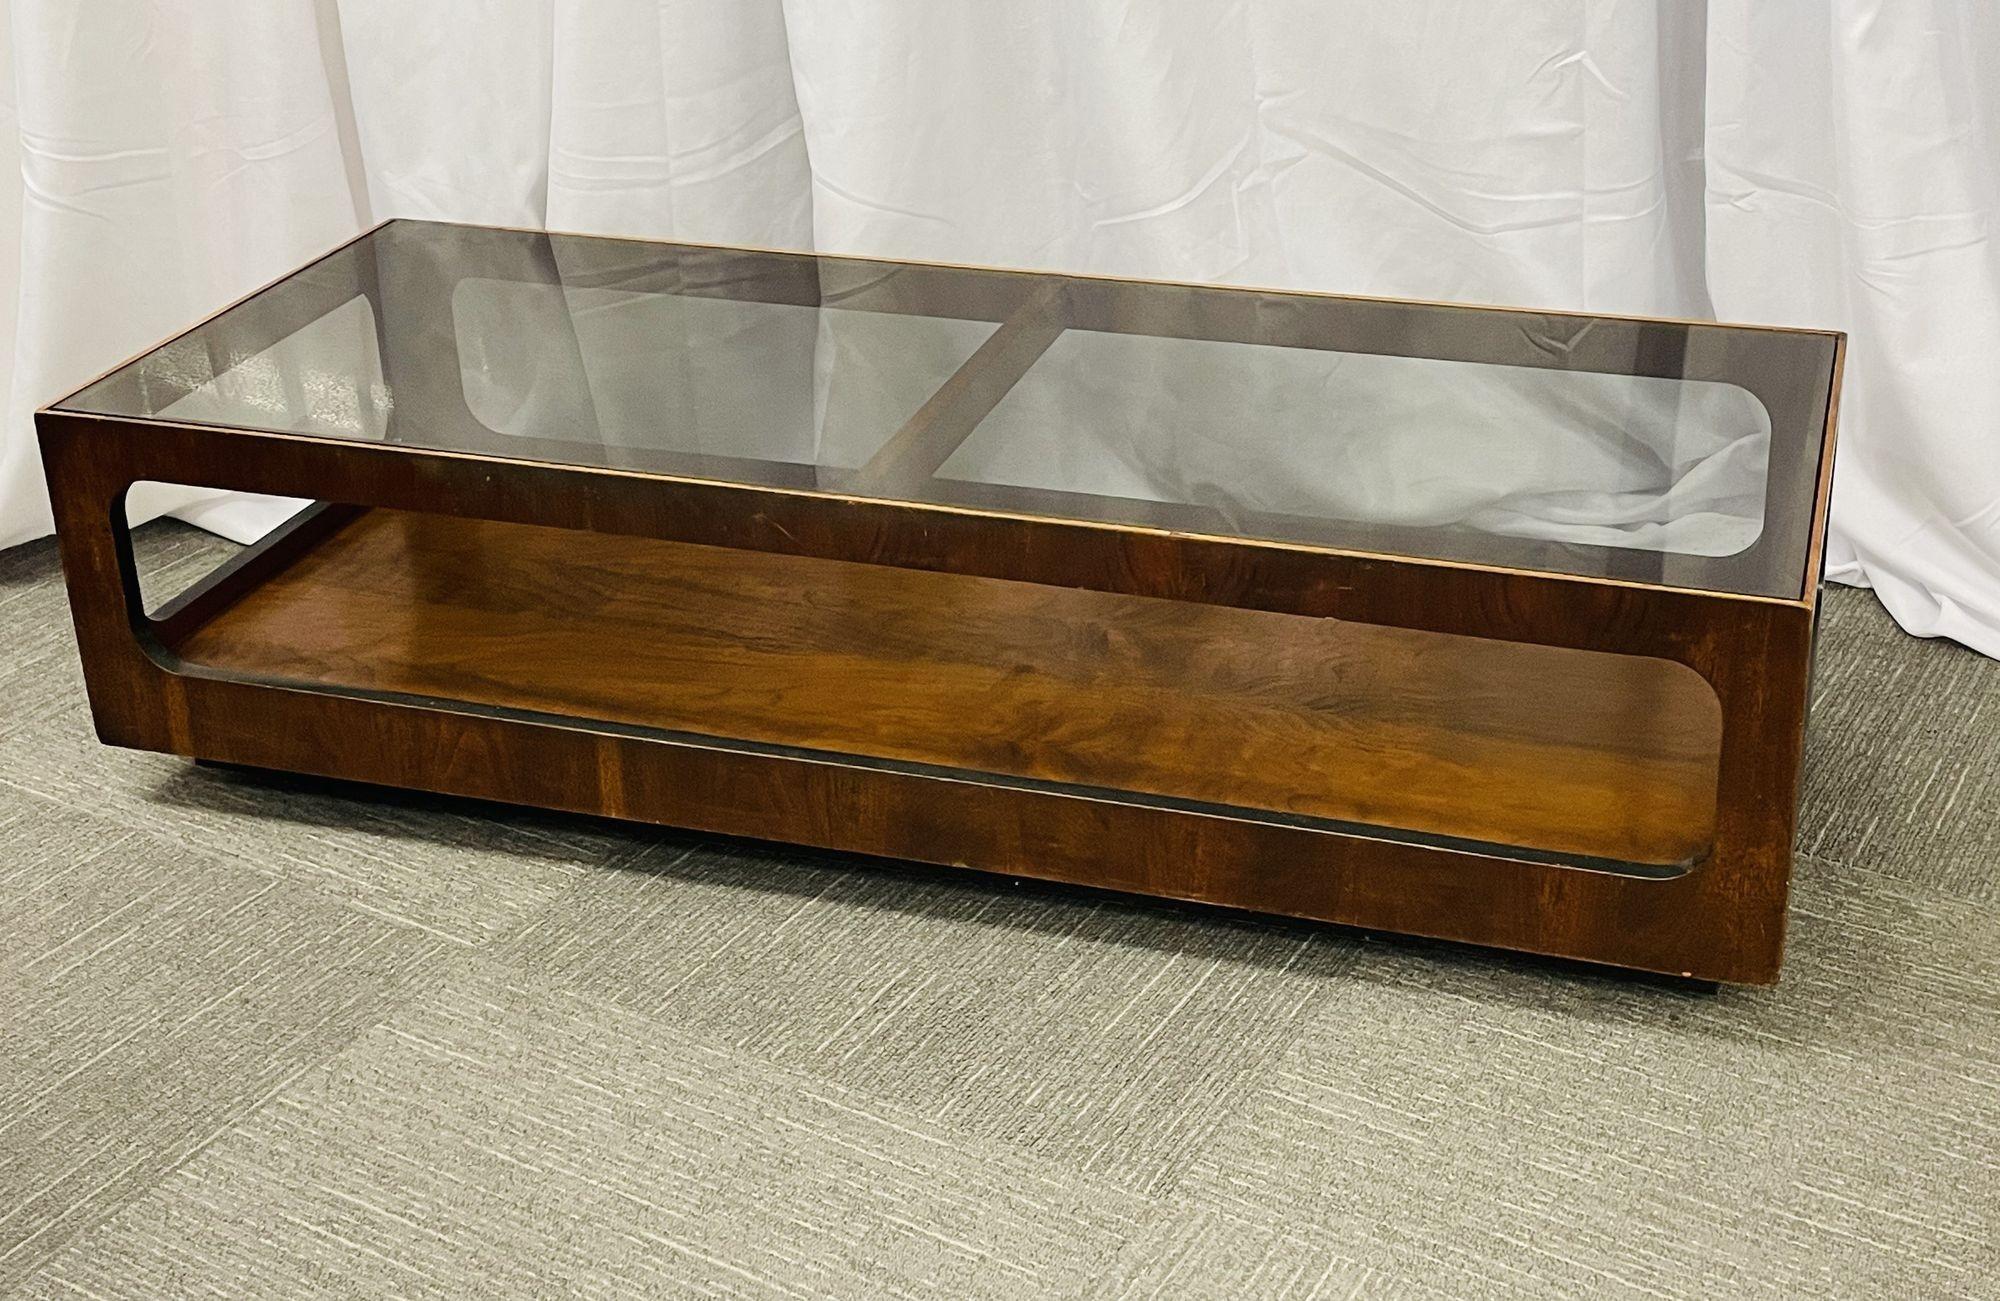 A Mid-Century Modern sculptured coffee table of walnut and ebony decorated design with a smoked glass top by Lane. In casters.
 
20.75 by 55 long by 14 H.